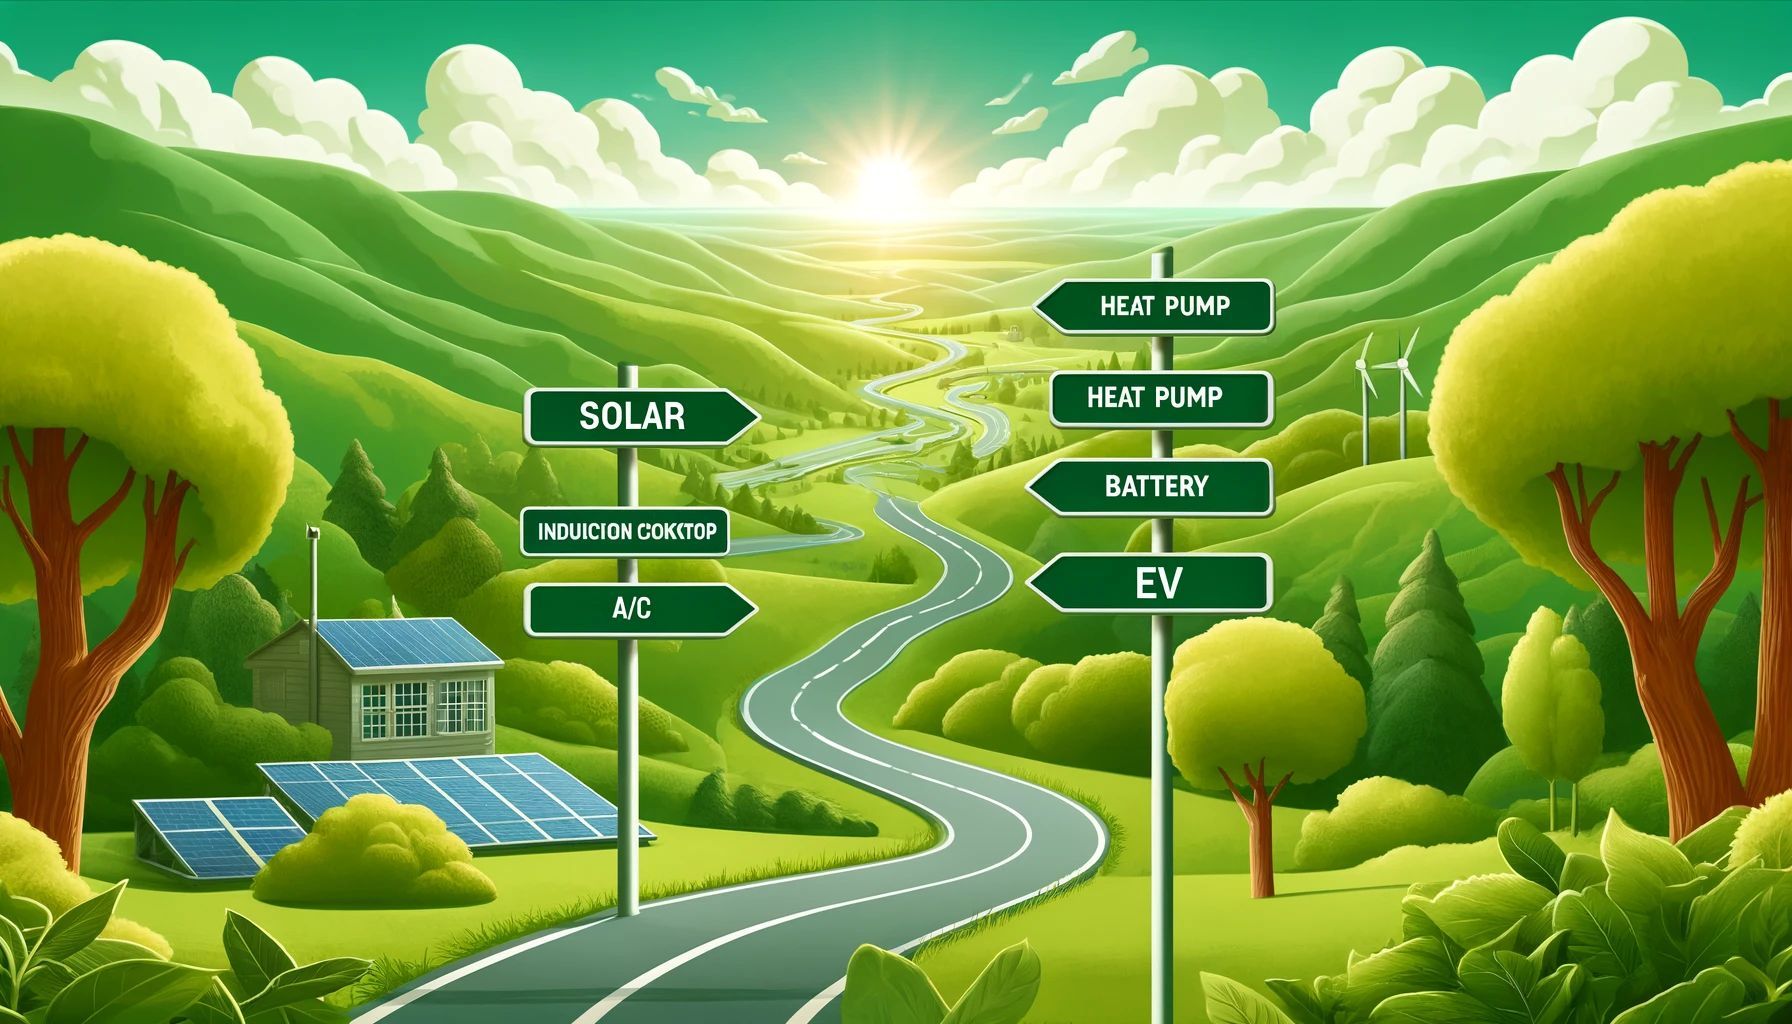 Renewable energy roadmap with solar and battery storage. Electricfy Melbourne